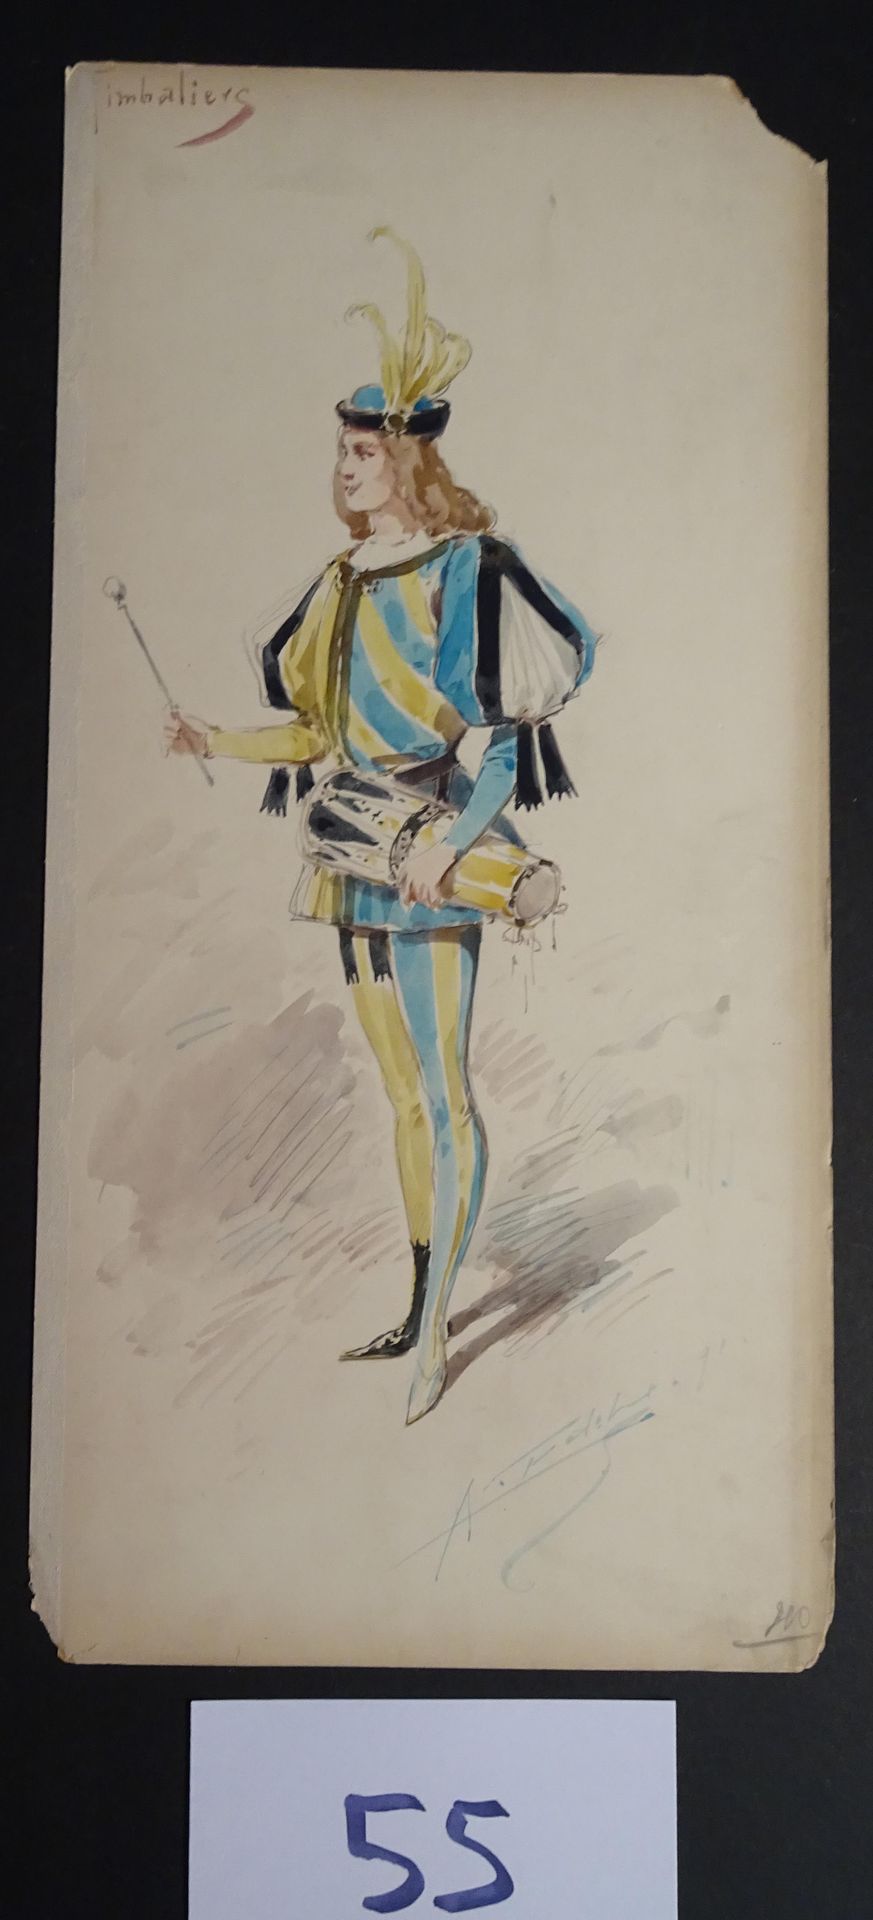 EDEL EDEL ALFREDO ( 1859-1912)

"Timbaliers". Gouache, watercolour and ink signe&hellip;